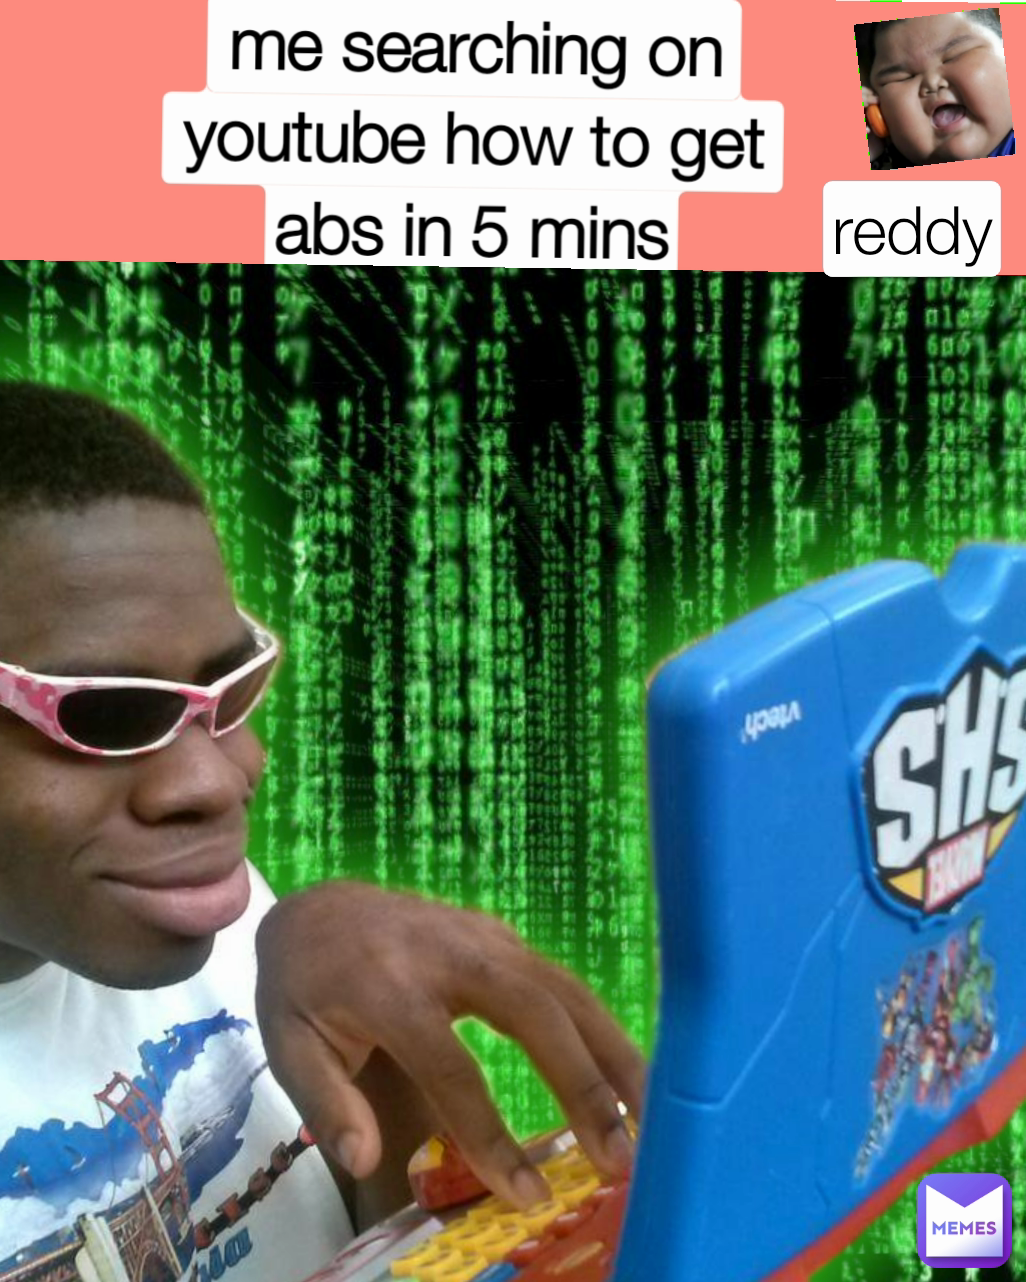 reddy me searching on
youtube how to get
abs in 5 mins